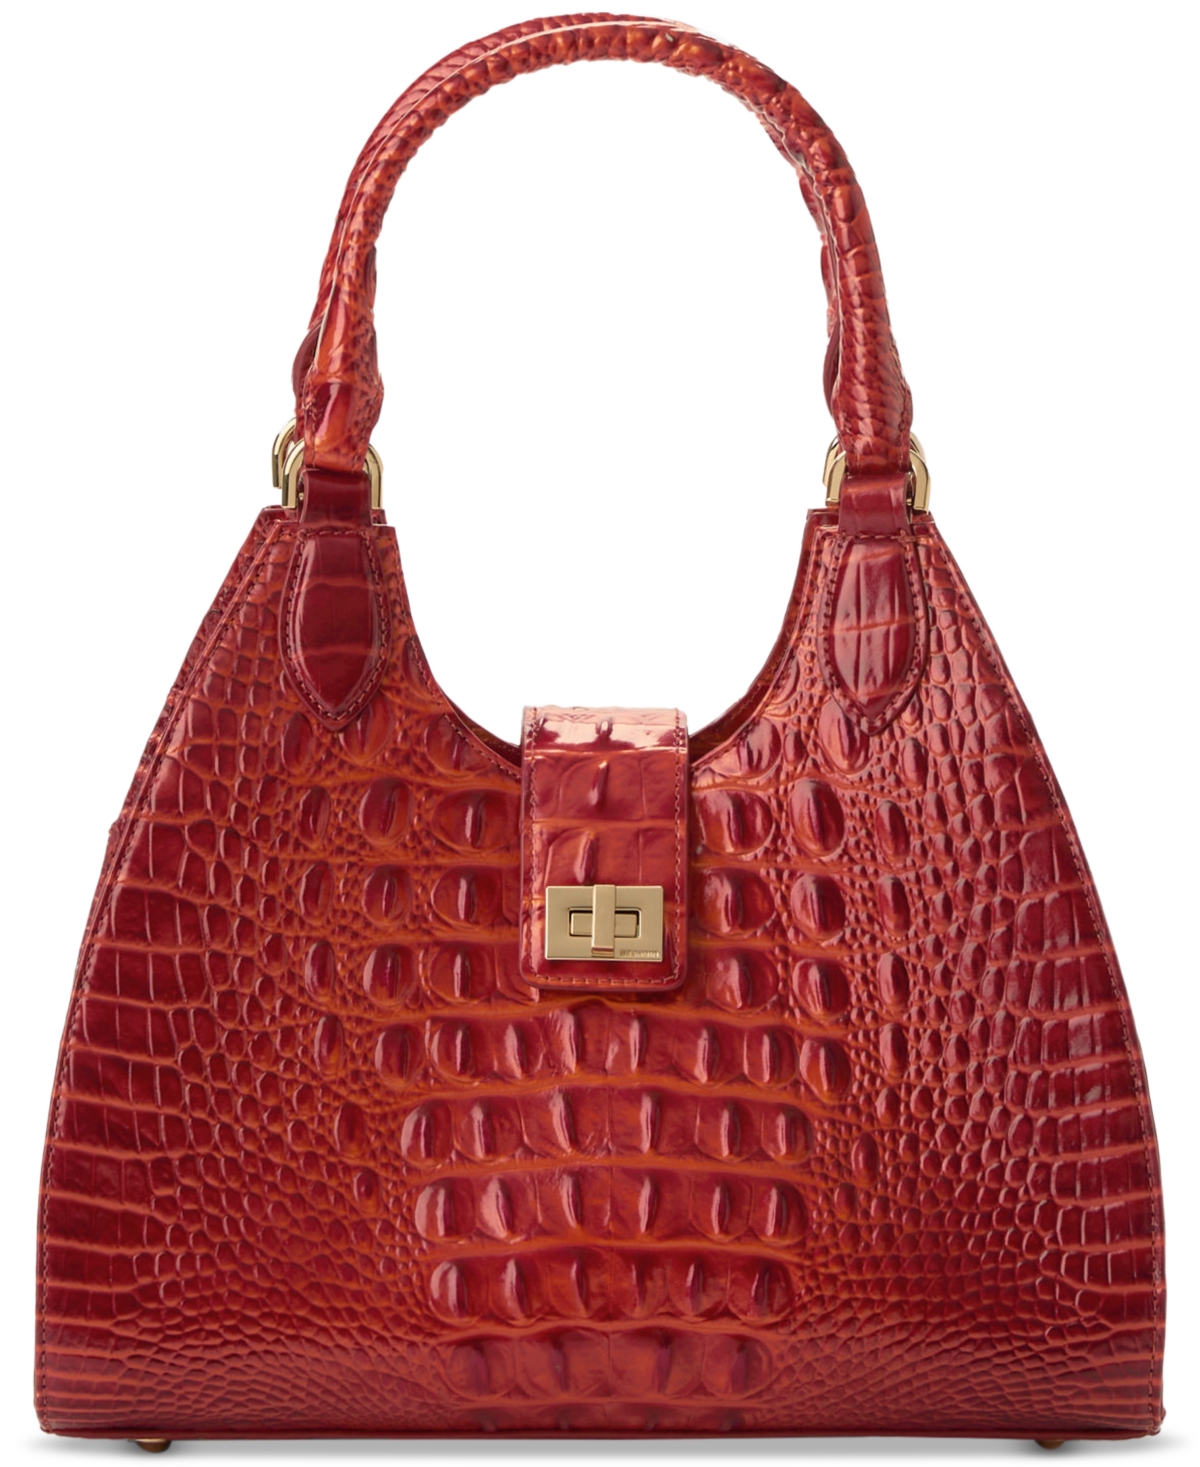 Brahmin Adrian Melbourne Small Leather Satchel In Radiant Re